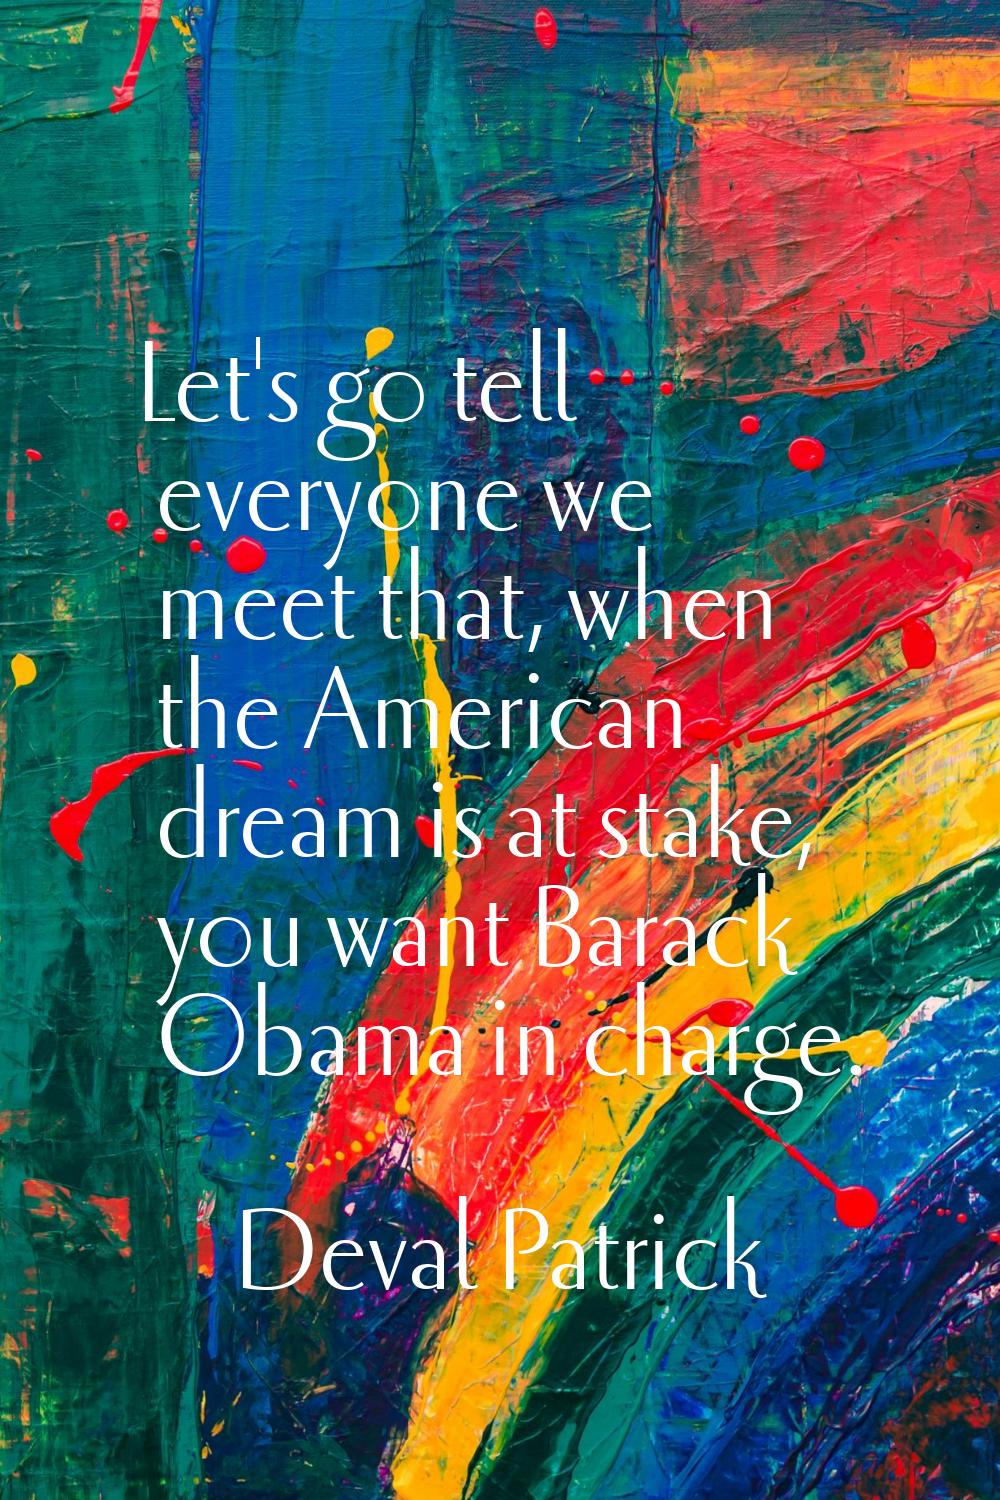 Let's go tell everyone we meet that, when the American dream is at stake, you want Barack Obama in 